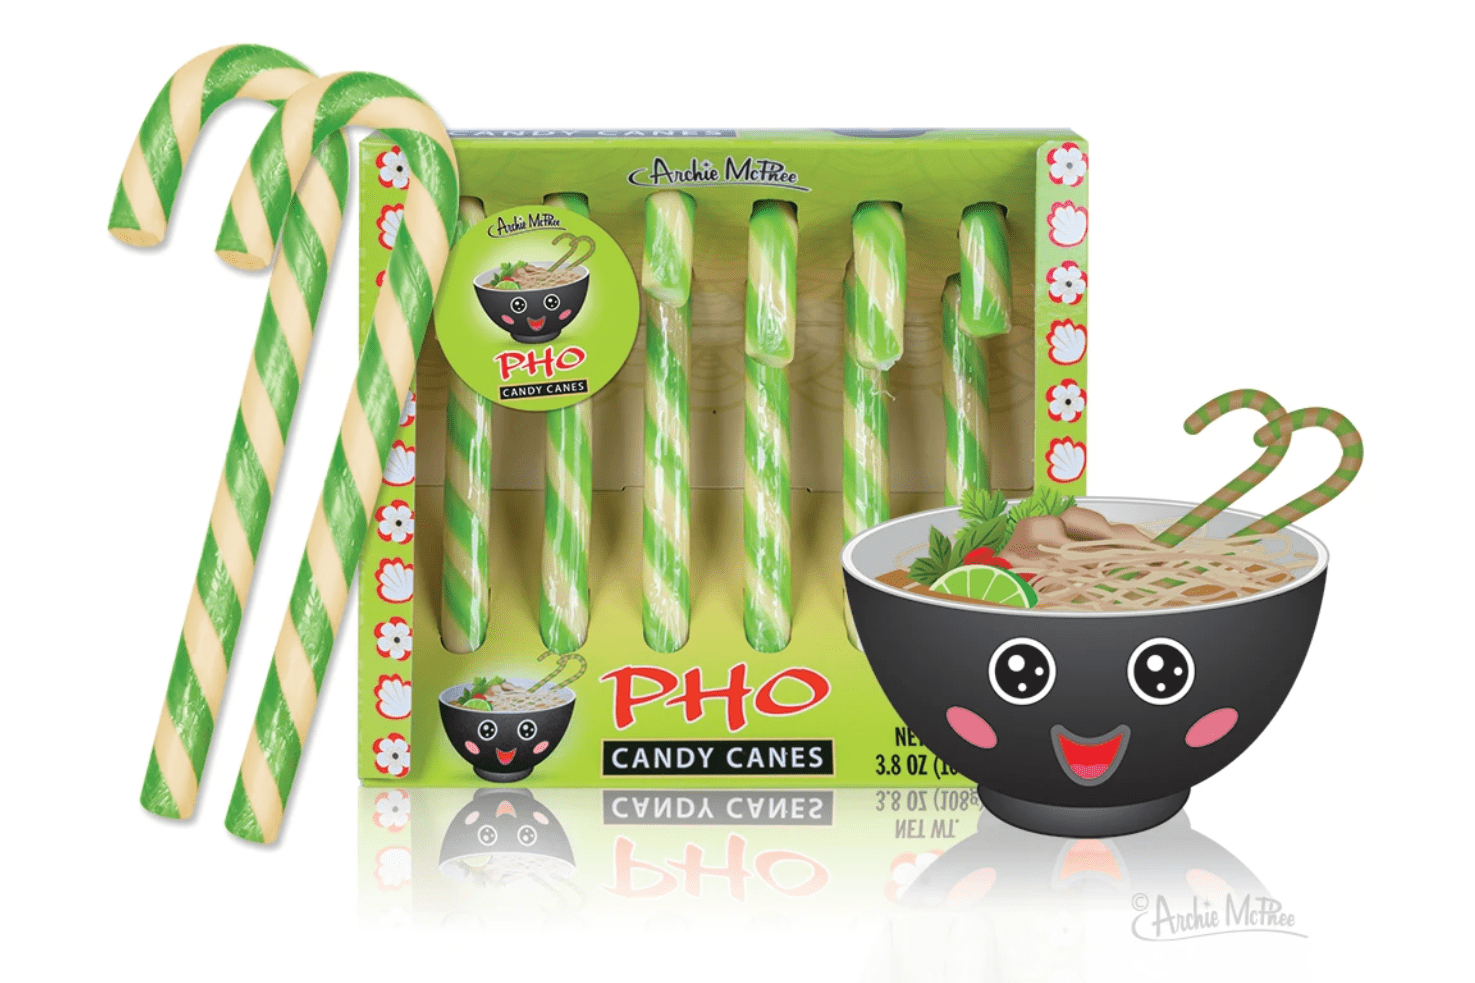 Archie McPhee Pho Candy Canes